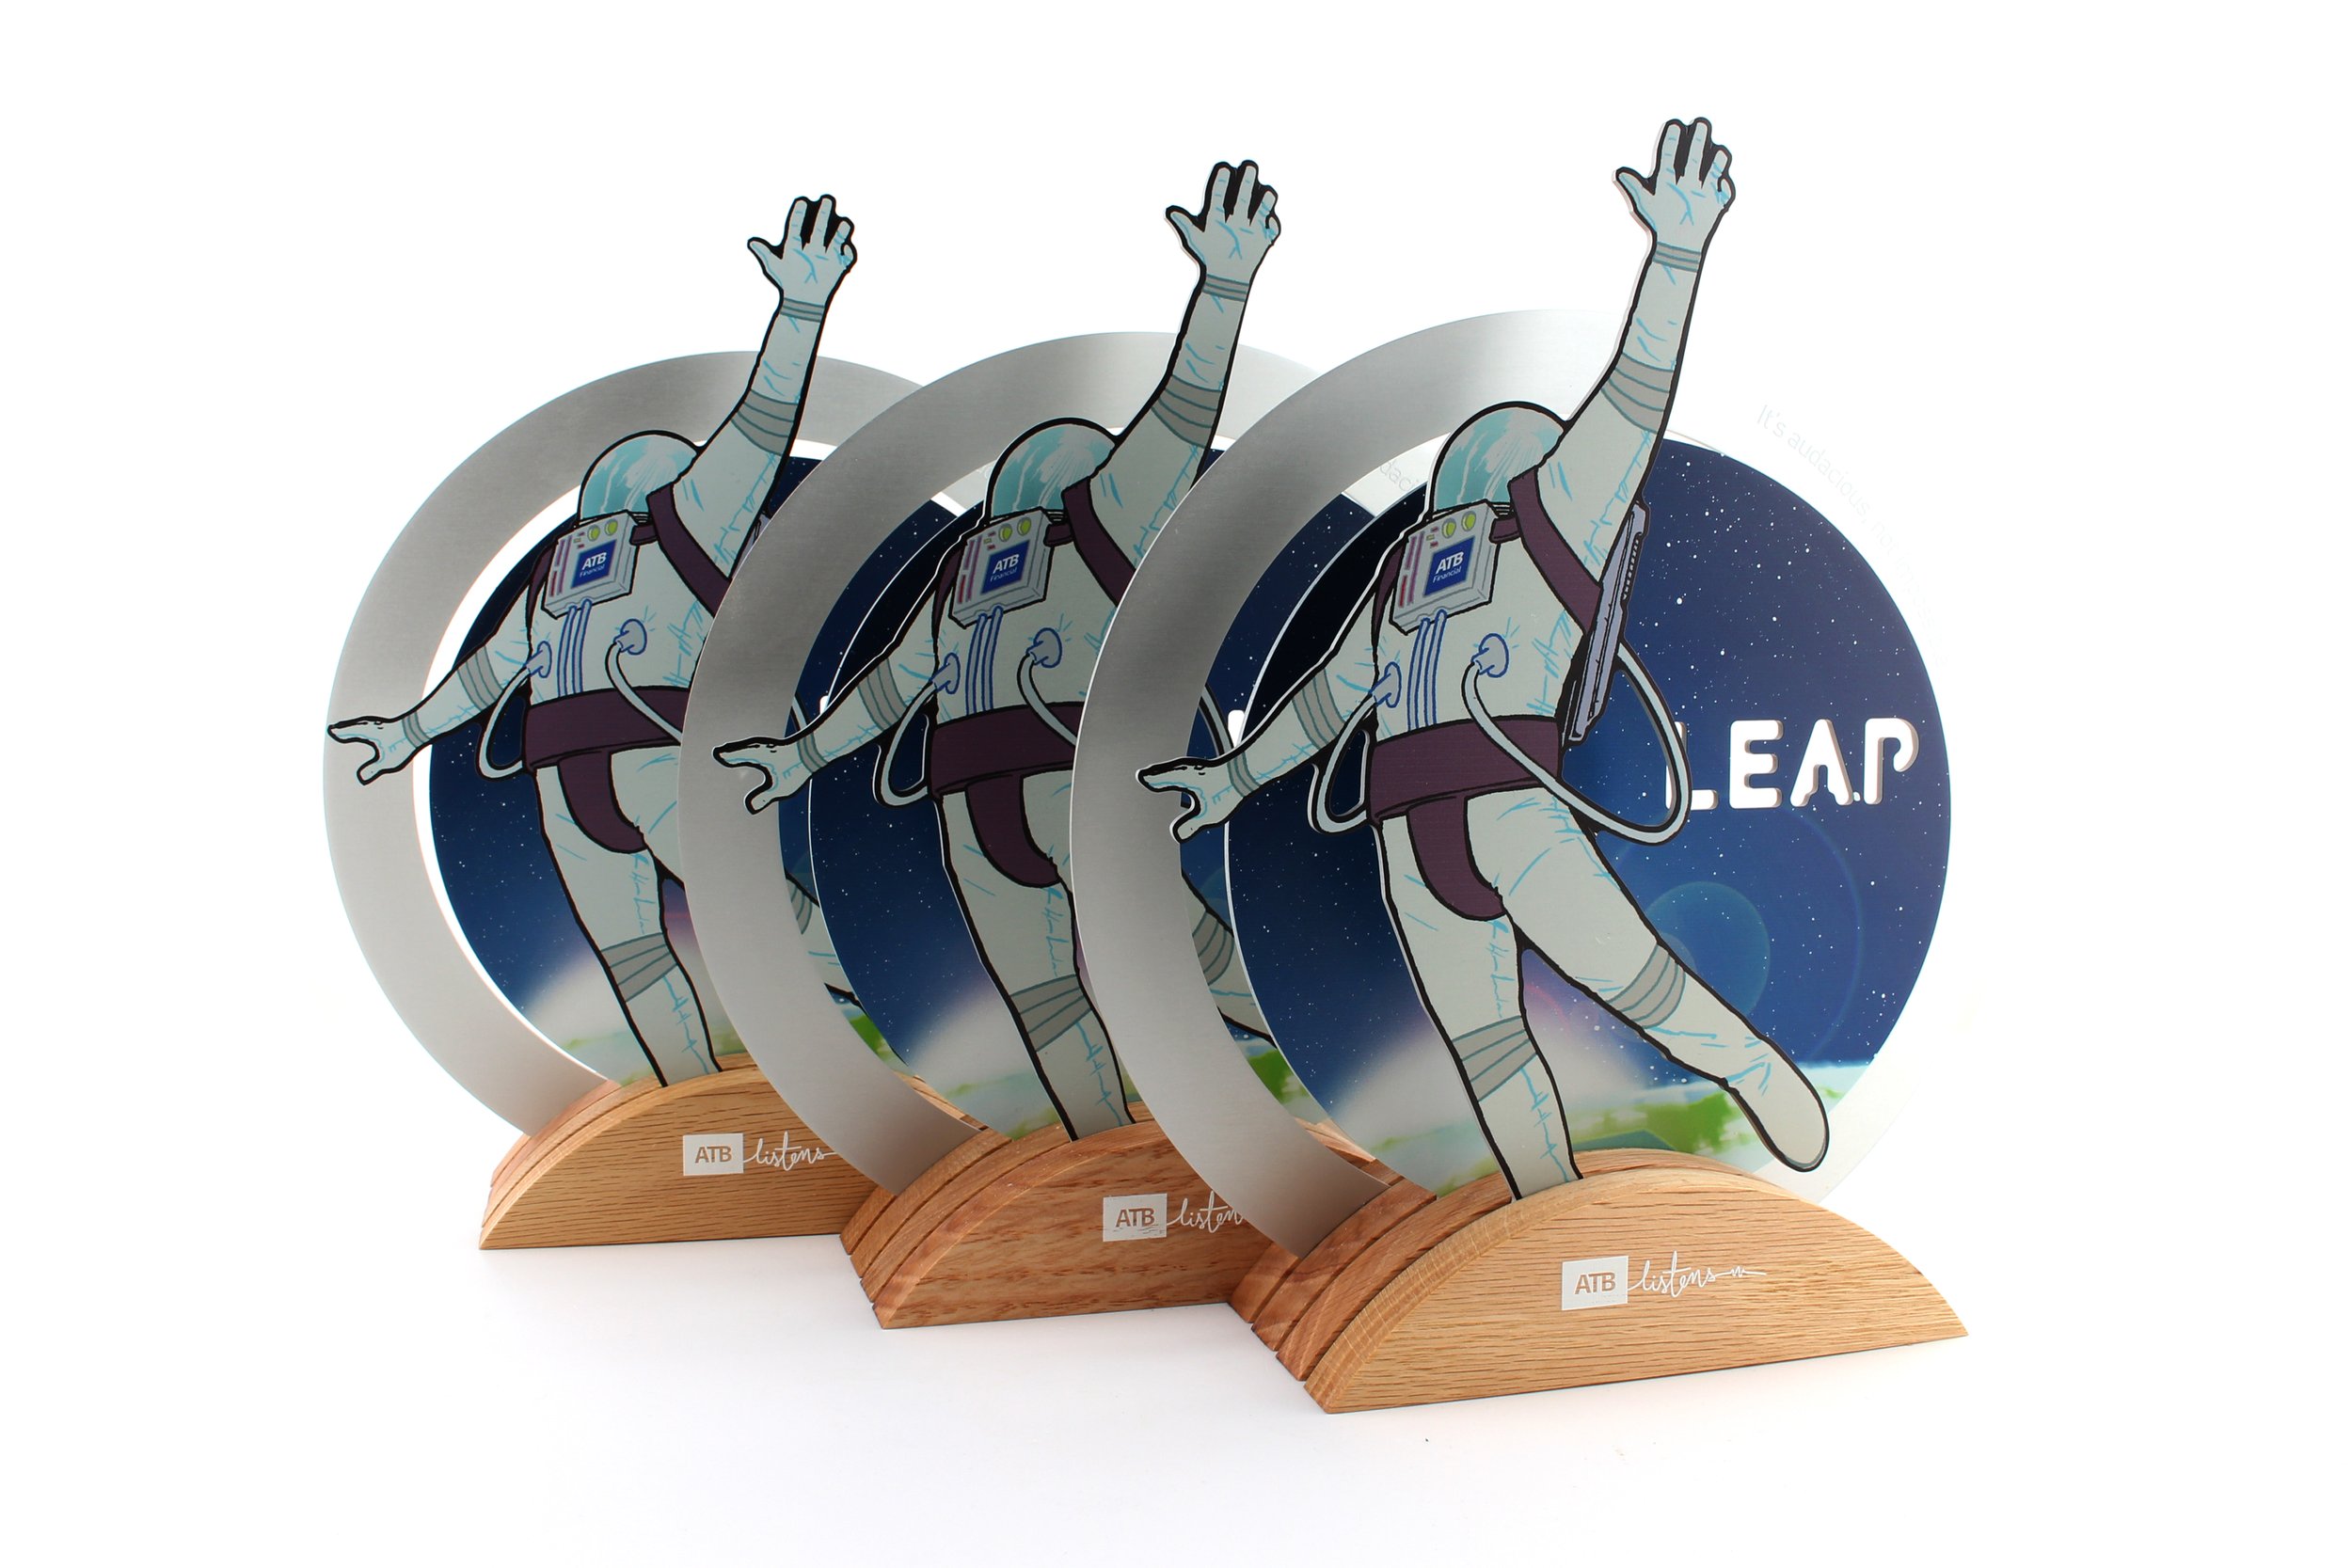 ATB leap awards for staff appreciation and workplace event high quality creative design 2